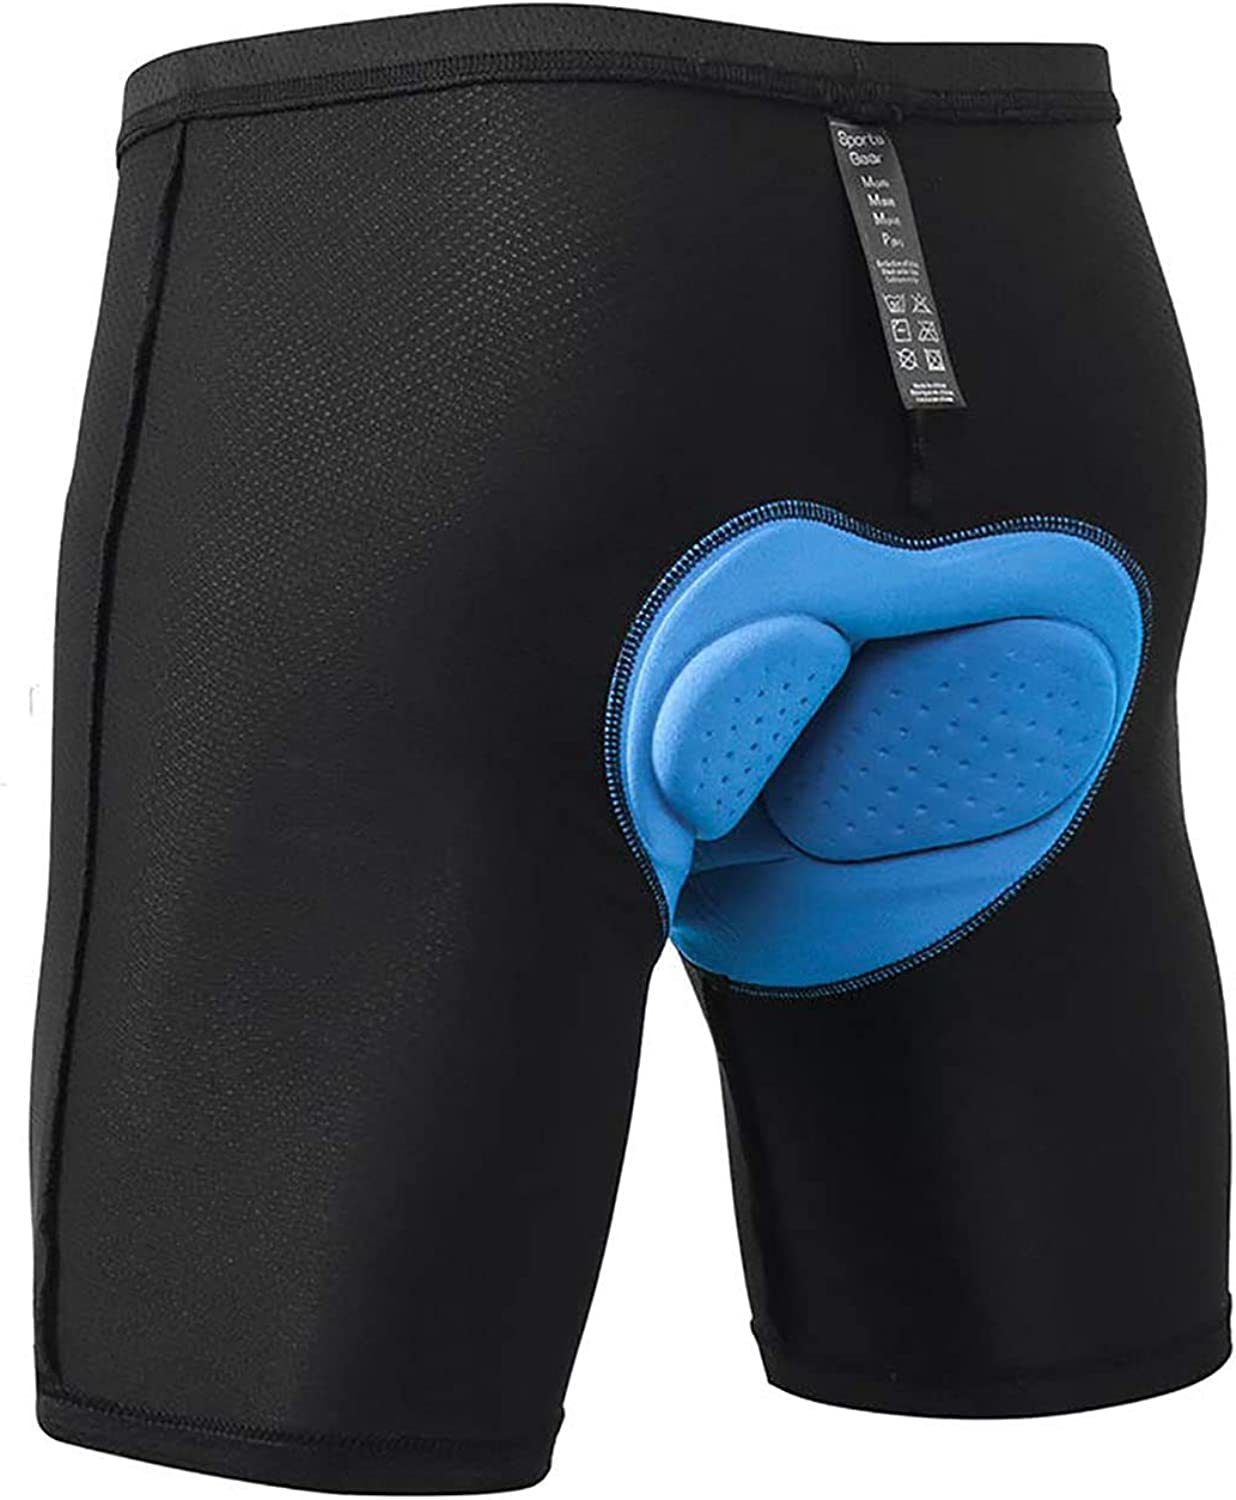 Men's Cycling Underwear, 3D Padded Bike Shorts, Quick Dry, 41% OFF